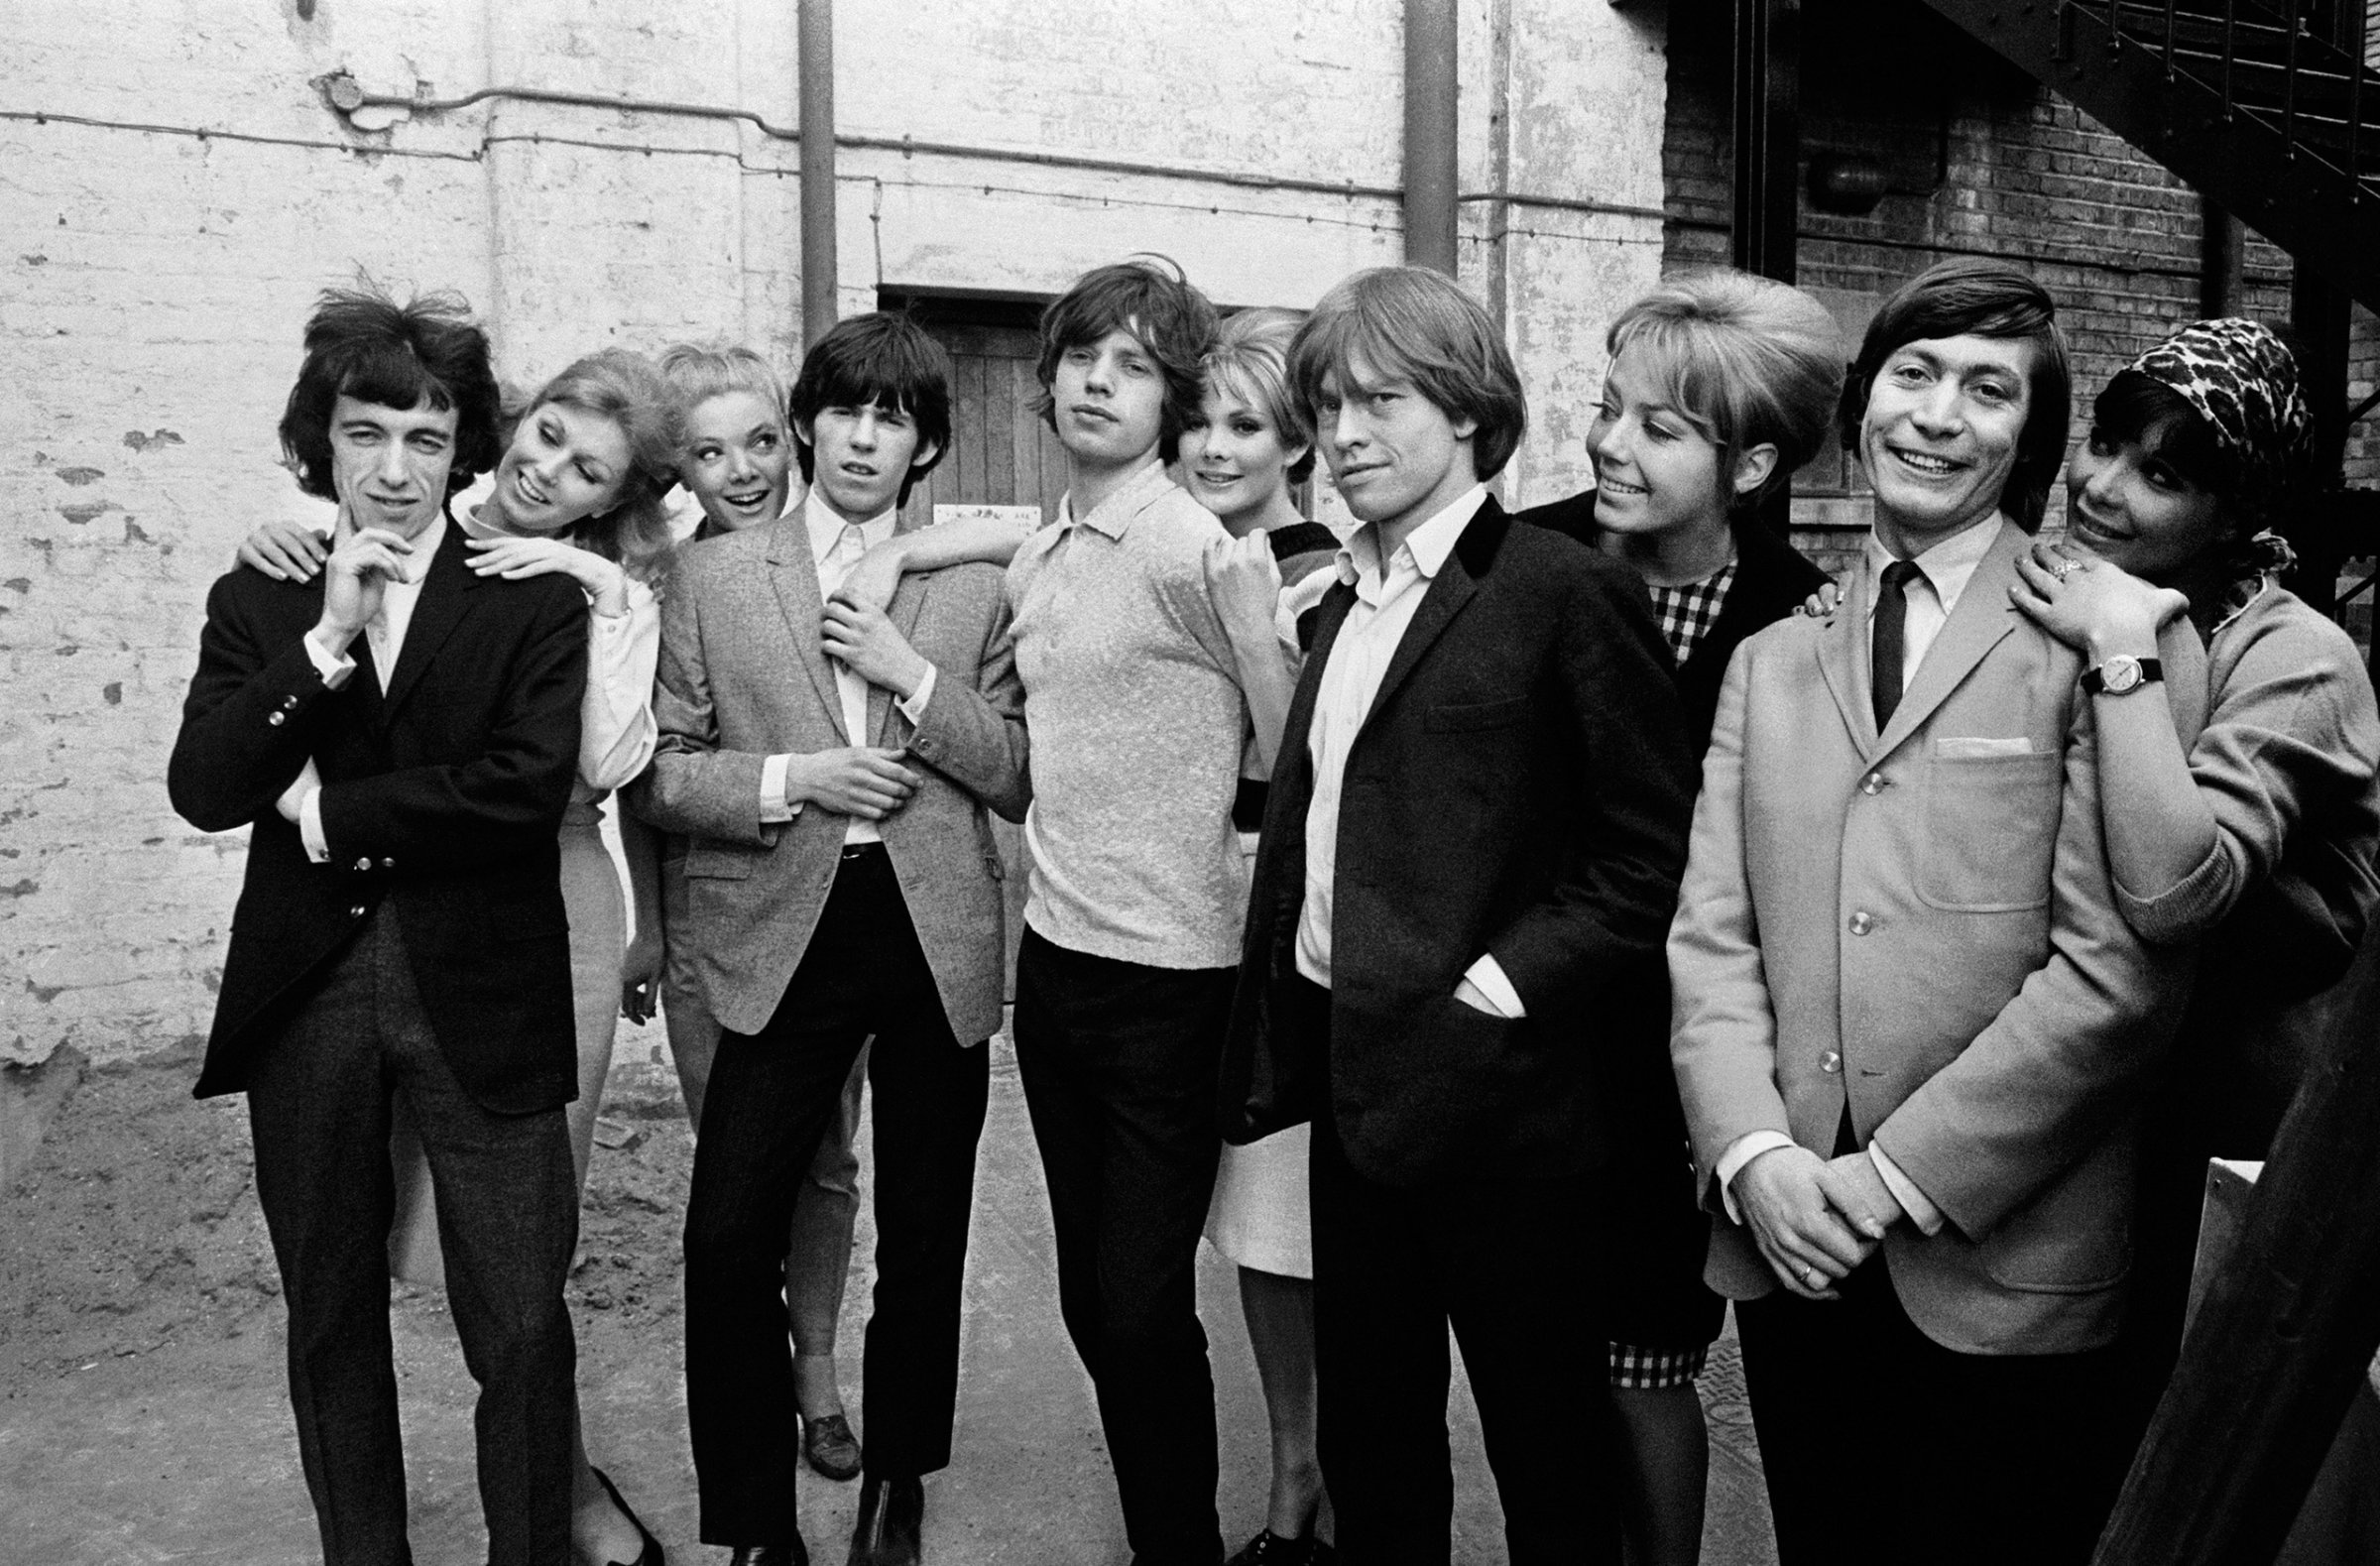 The Rolling Stones posing with a group of women during rehearsals for ABC's 'Thank Your Lucky Stars' TV pop music show at Teddington Studios, London, November 11, 1964. From left to right, Bill Wyman, Keith Richards, Mick Jagger, Brian Jones and Charlie Watts.